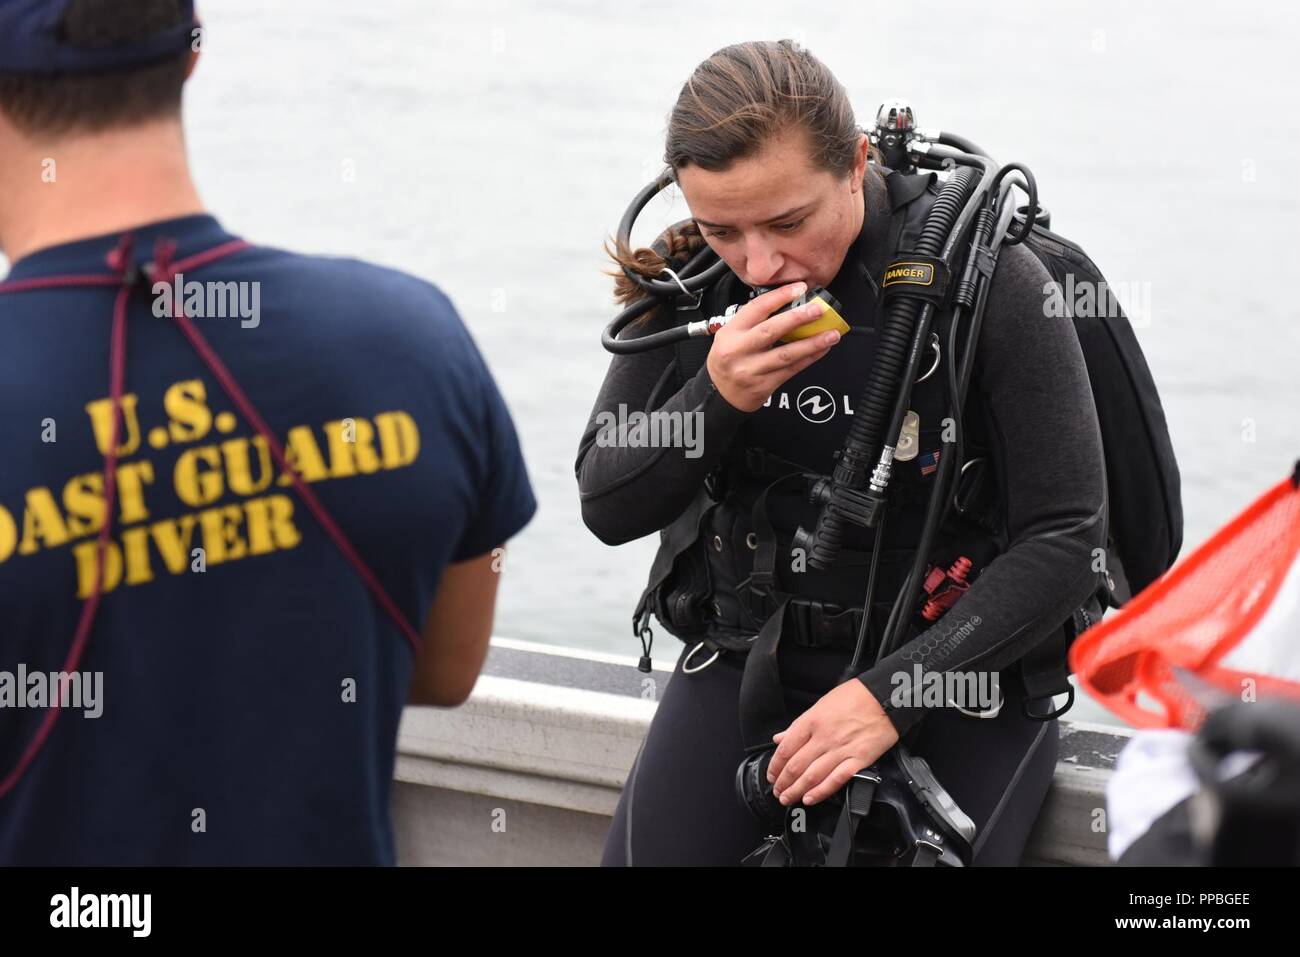 Petty Officer 2nd Class Monique Gilbreath, a diver from the Coast Guard Regional Dive Locker West, Maritime Security Response Team West, checks her equipment prior to entering the water along North Harbor Drive, San Diego Aug. 25, 2018. The dive team was participating in Operation Clean Sweep 2018, a community cleanup effort along the San Diego Bay. Stock Photo